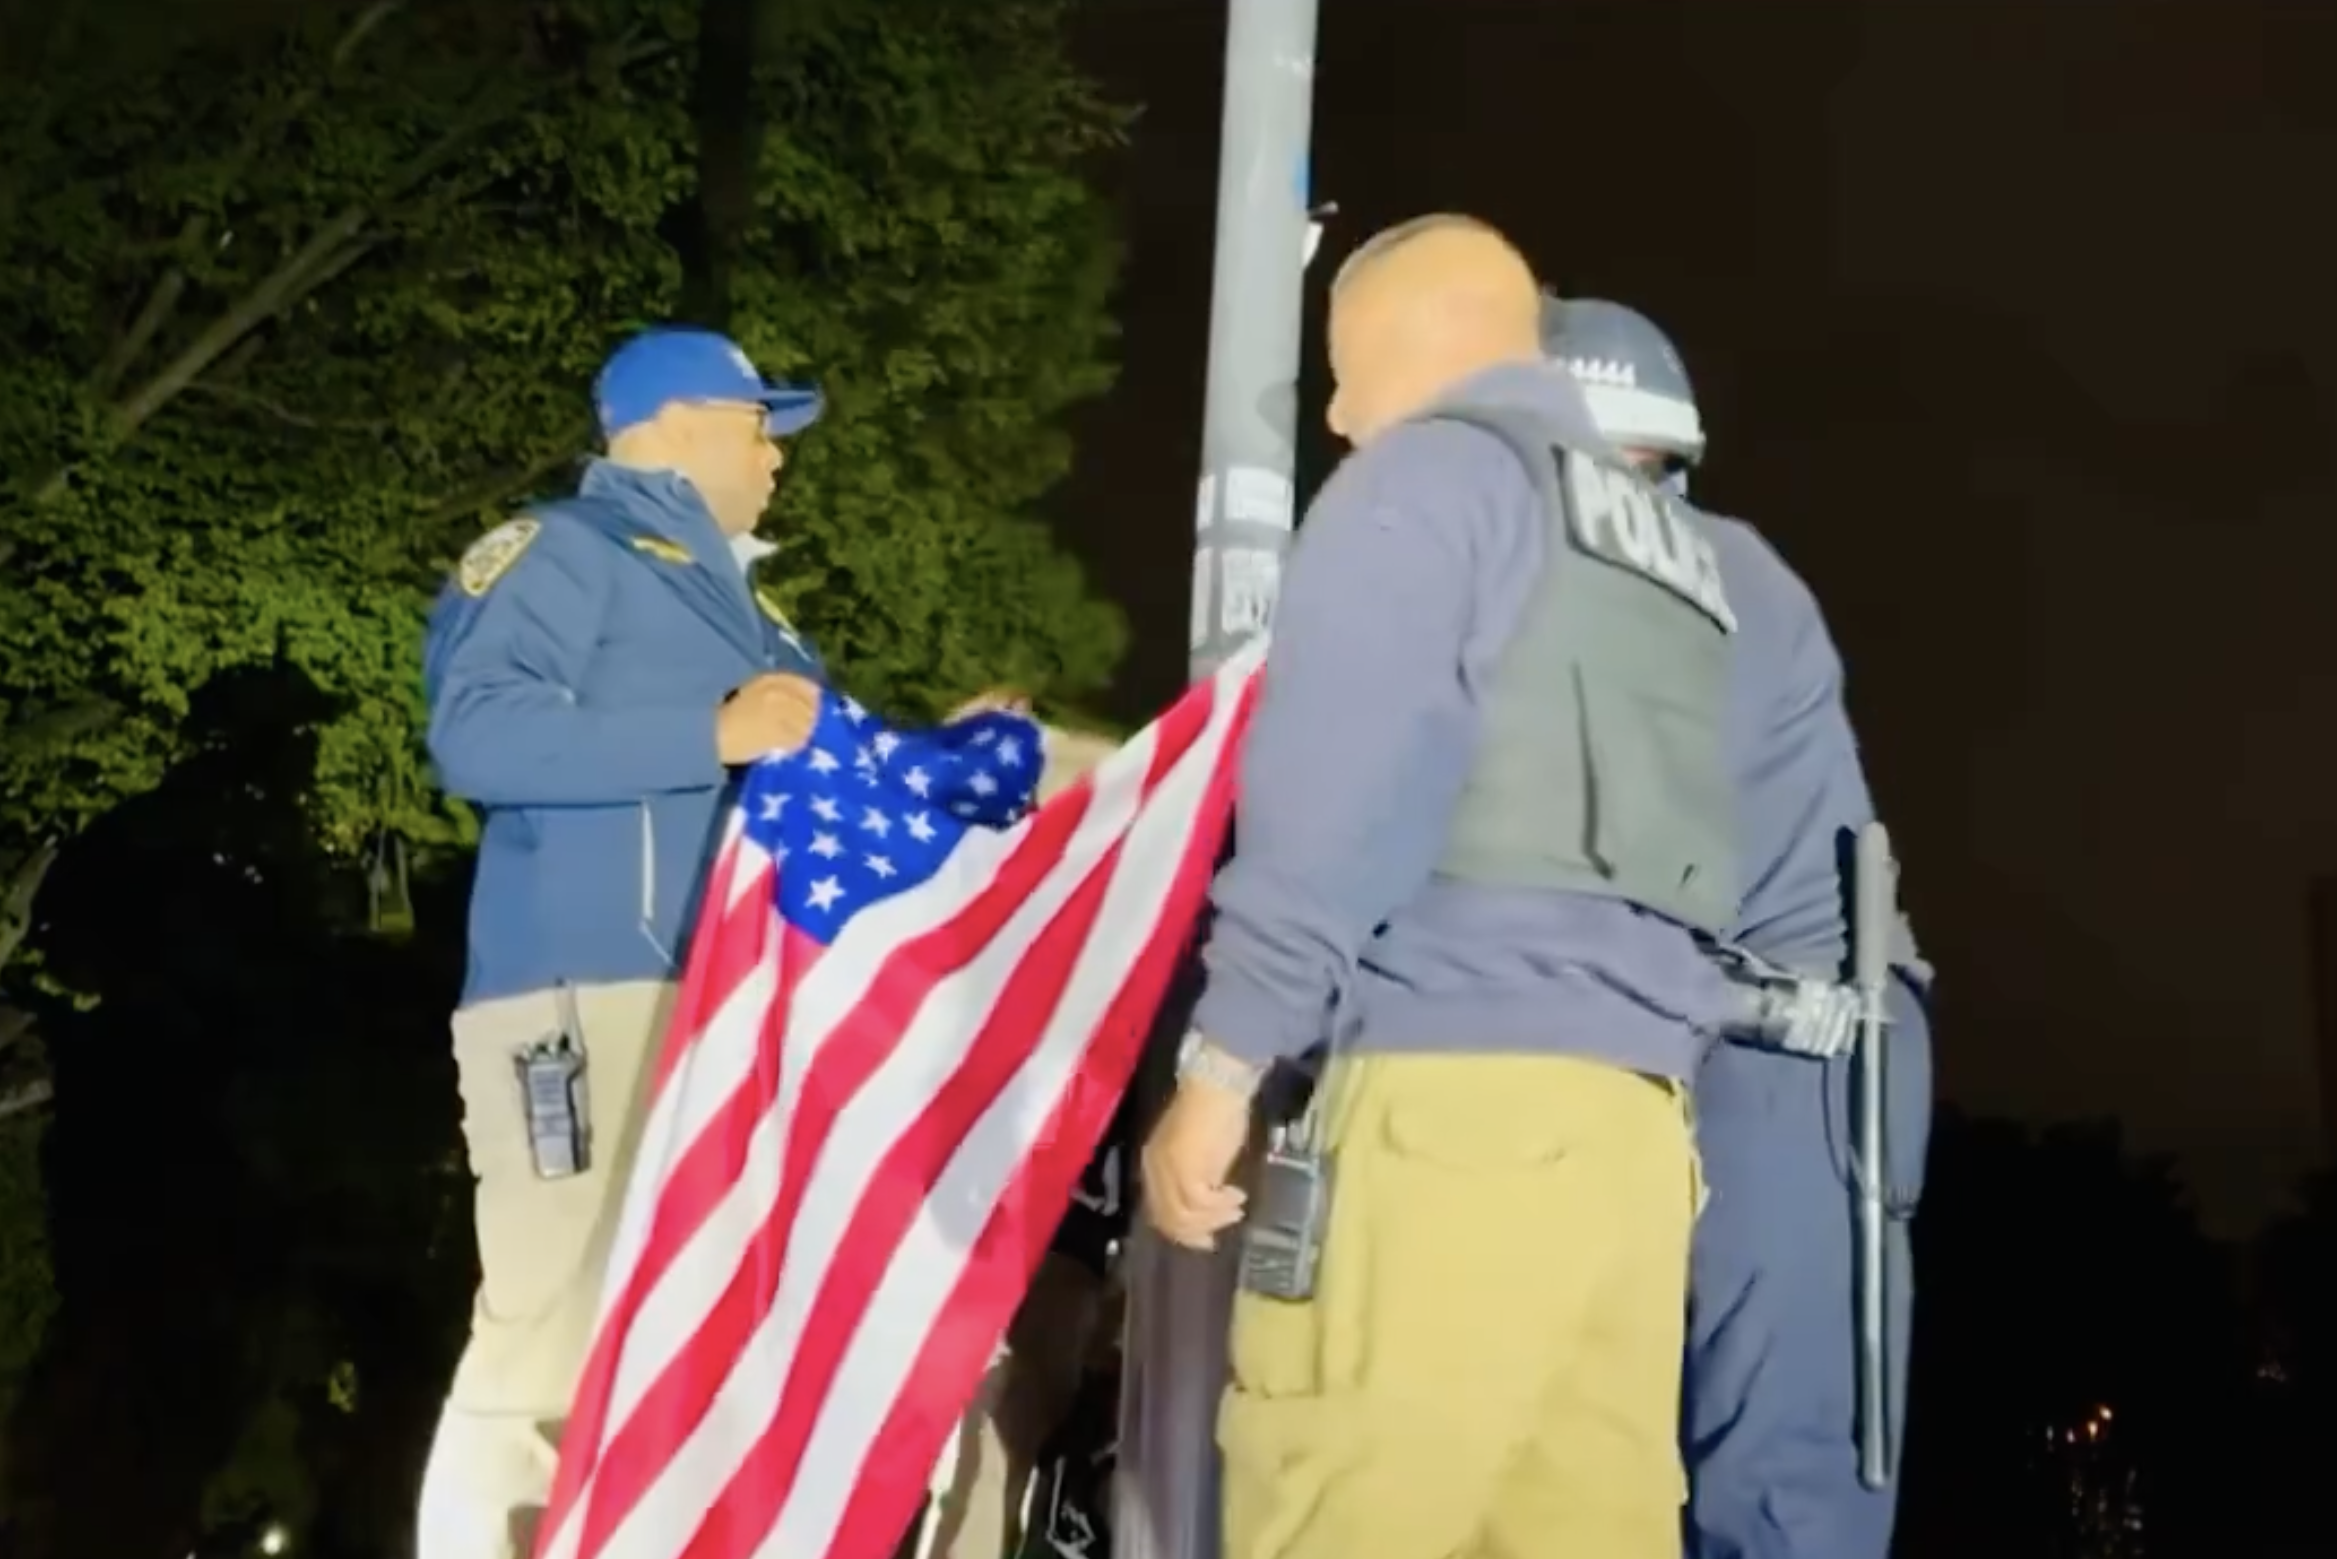 VIDEO: NYPD Removes Palestinian Flag at City College of New York, Replaced with American Flag